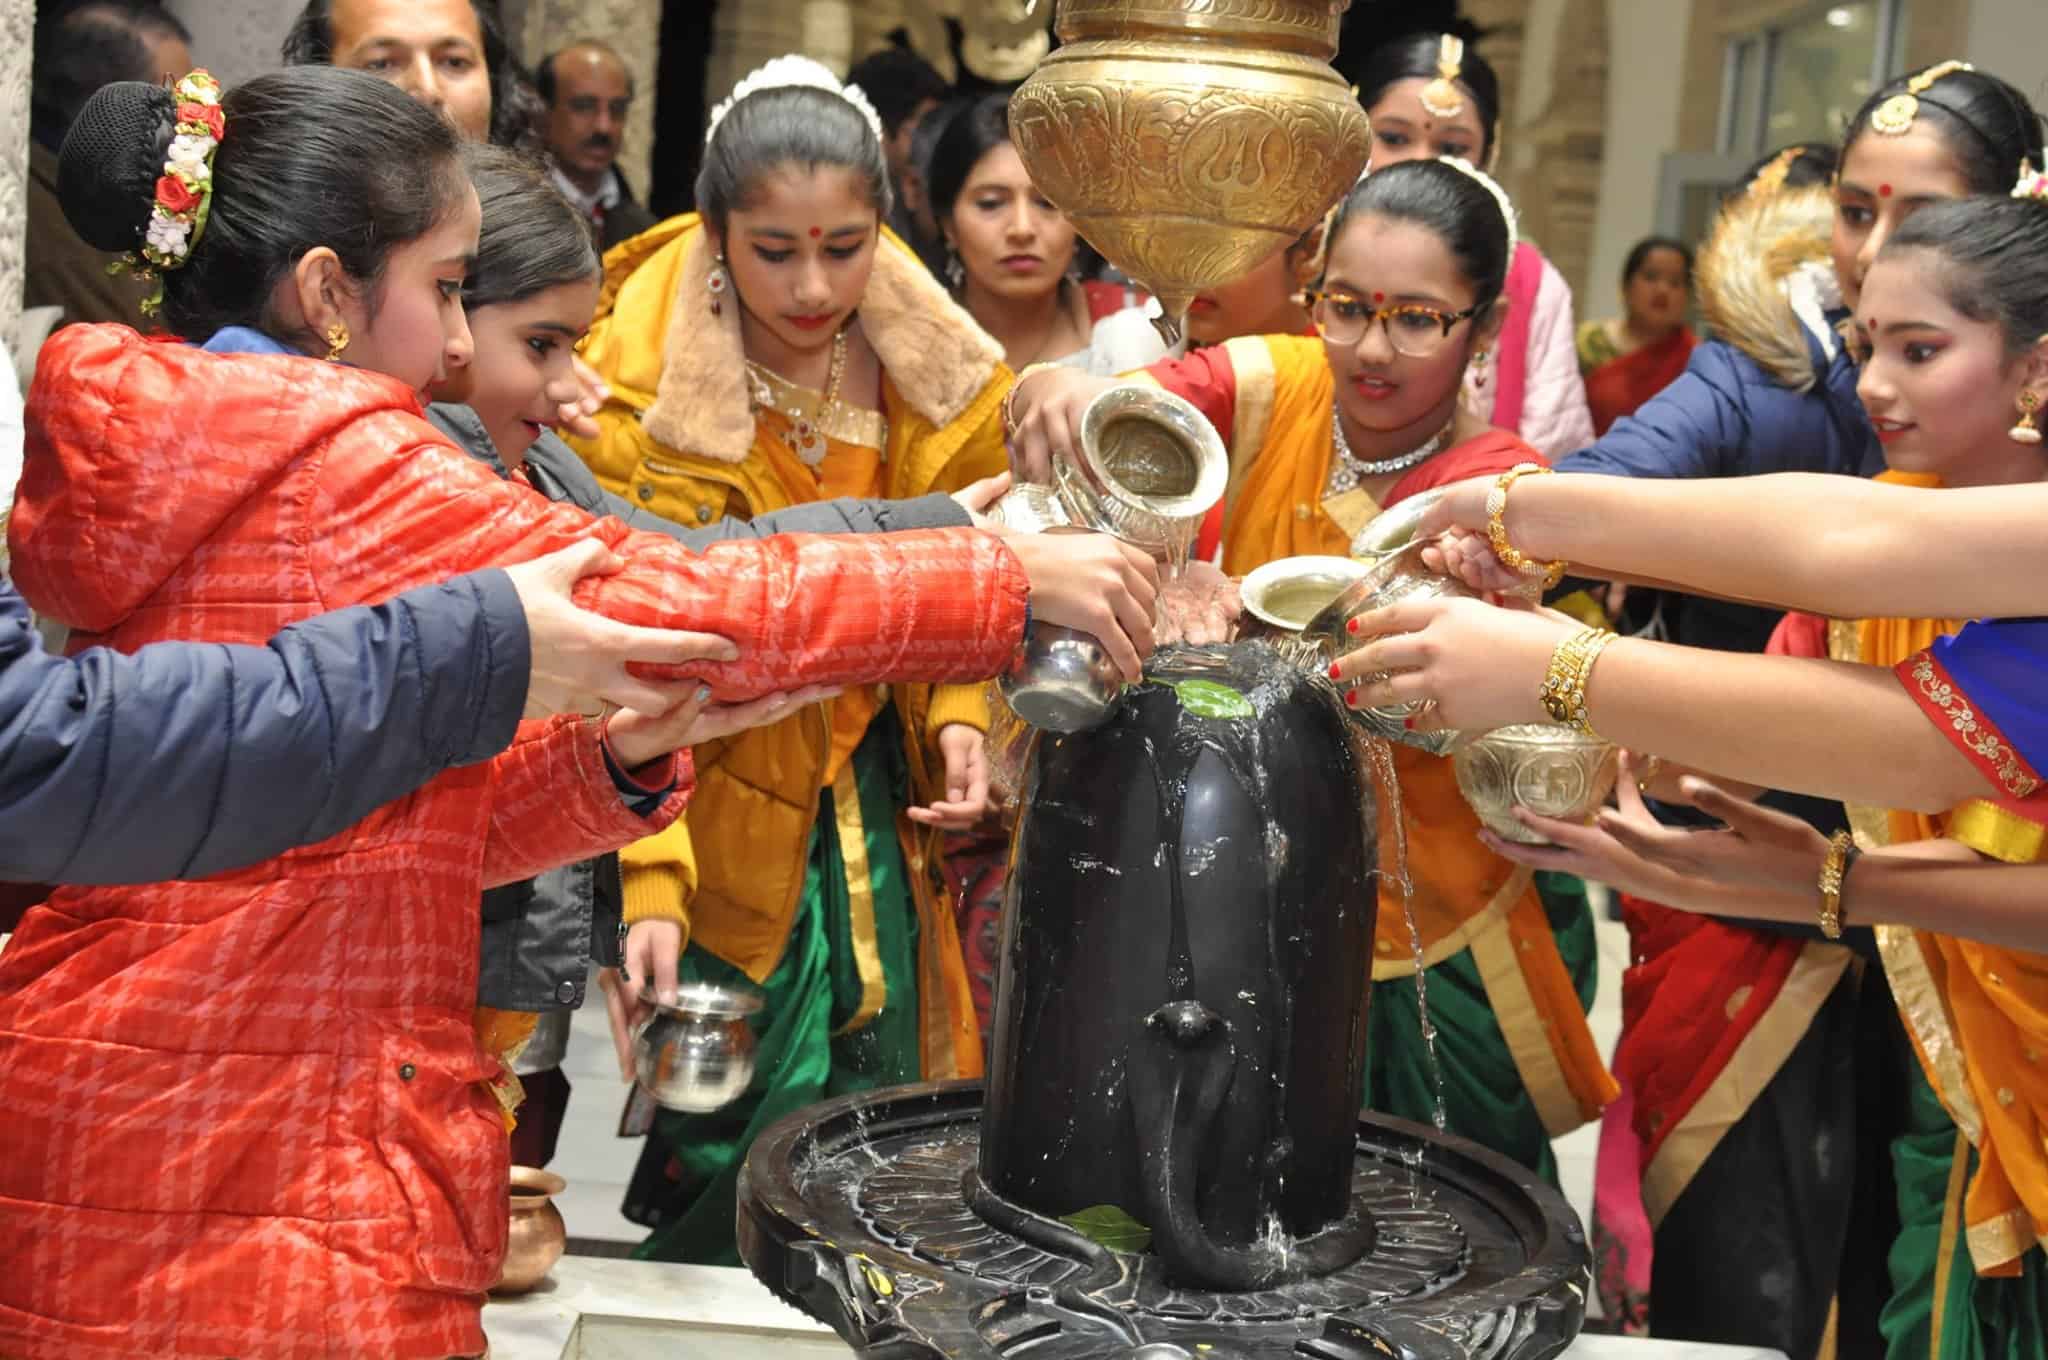 Group of people doing abhishek for Shiv Ling